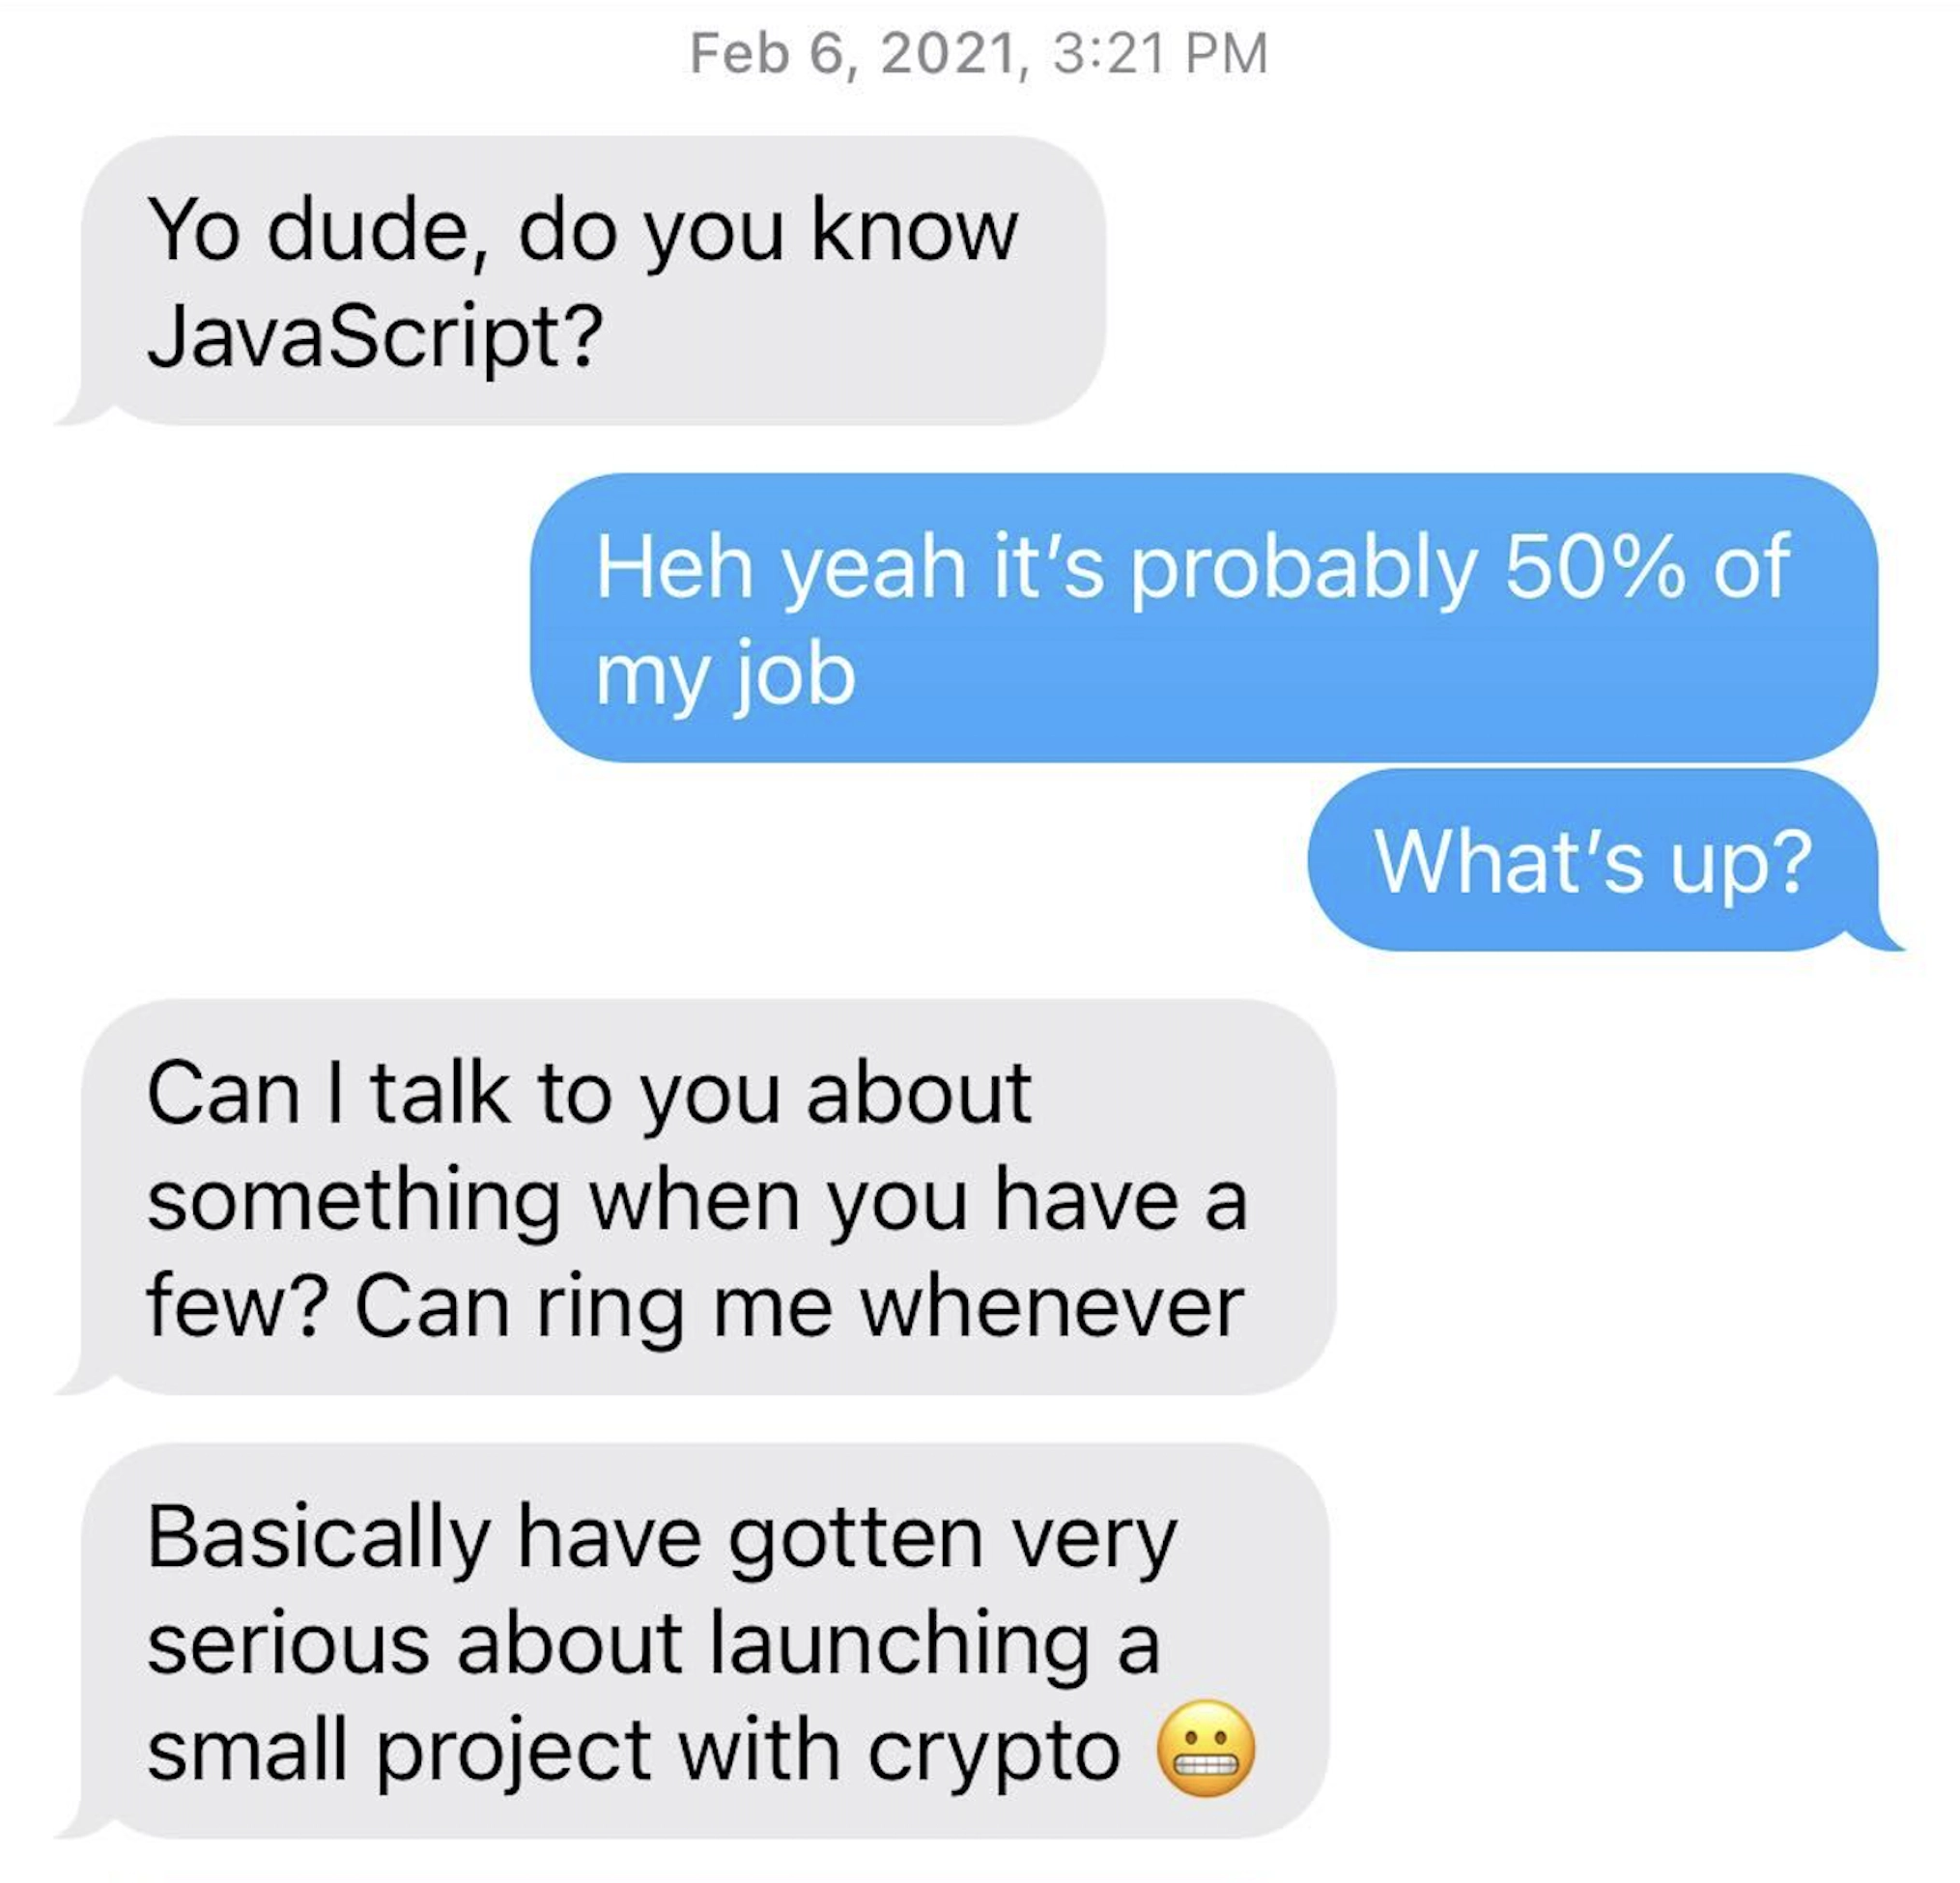 (Text from Garga to Tomato. “At the time I thought JavaScript was important to making an NFT which it super isn’t.”-Garga)